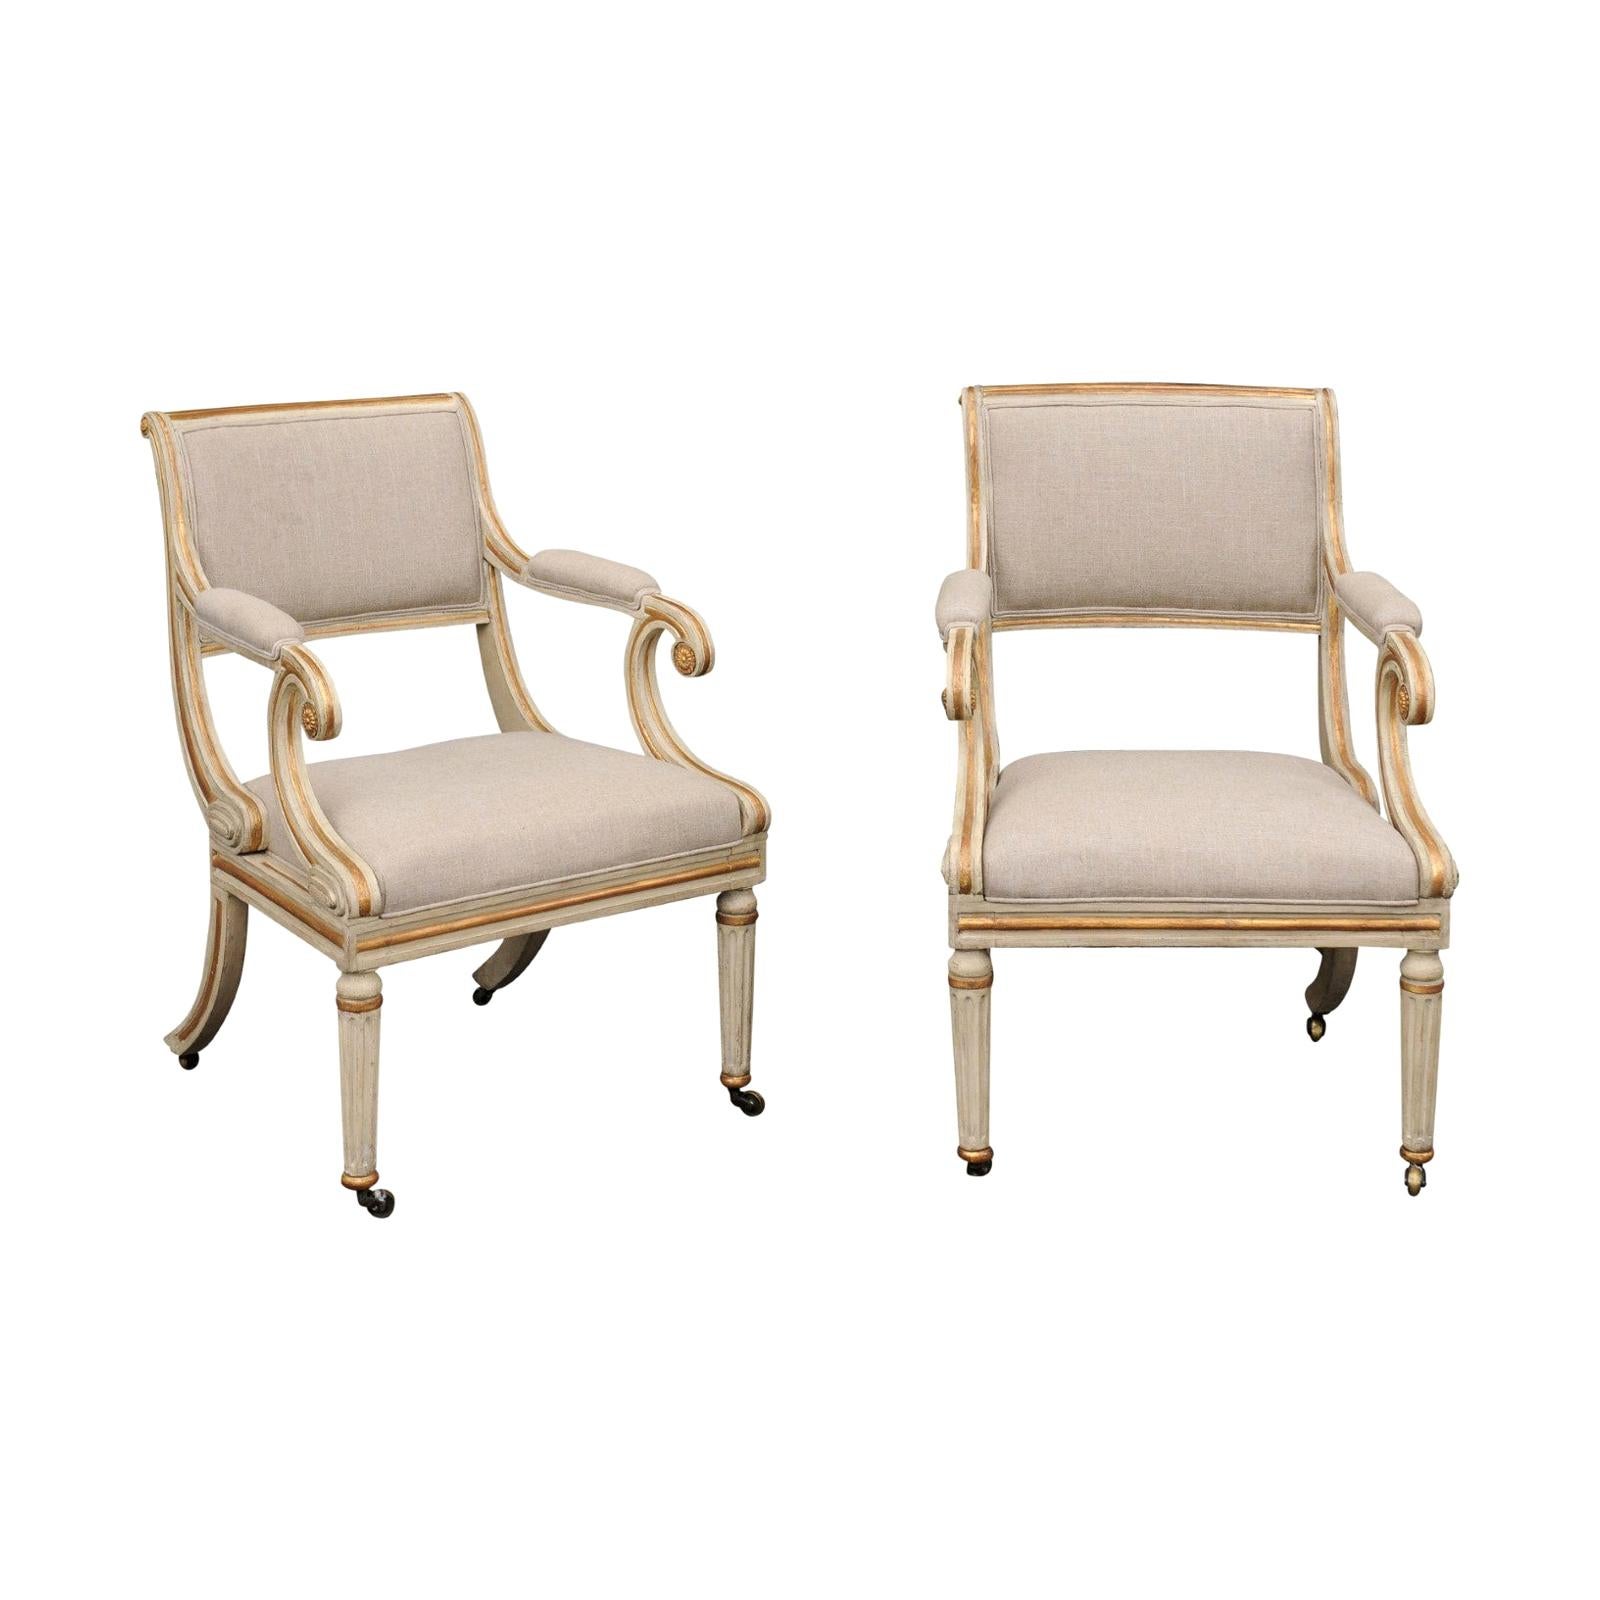 Pair of English 1900s Regency Style Painted and Parcel-Gilt Armchairs on Casters